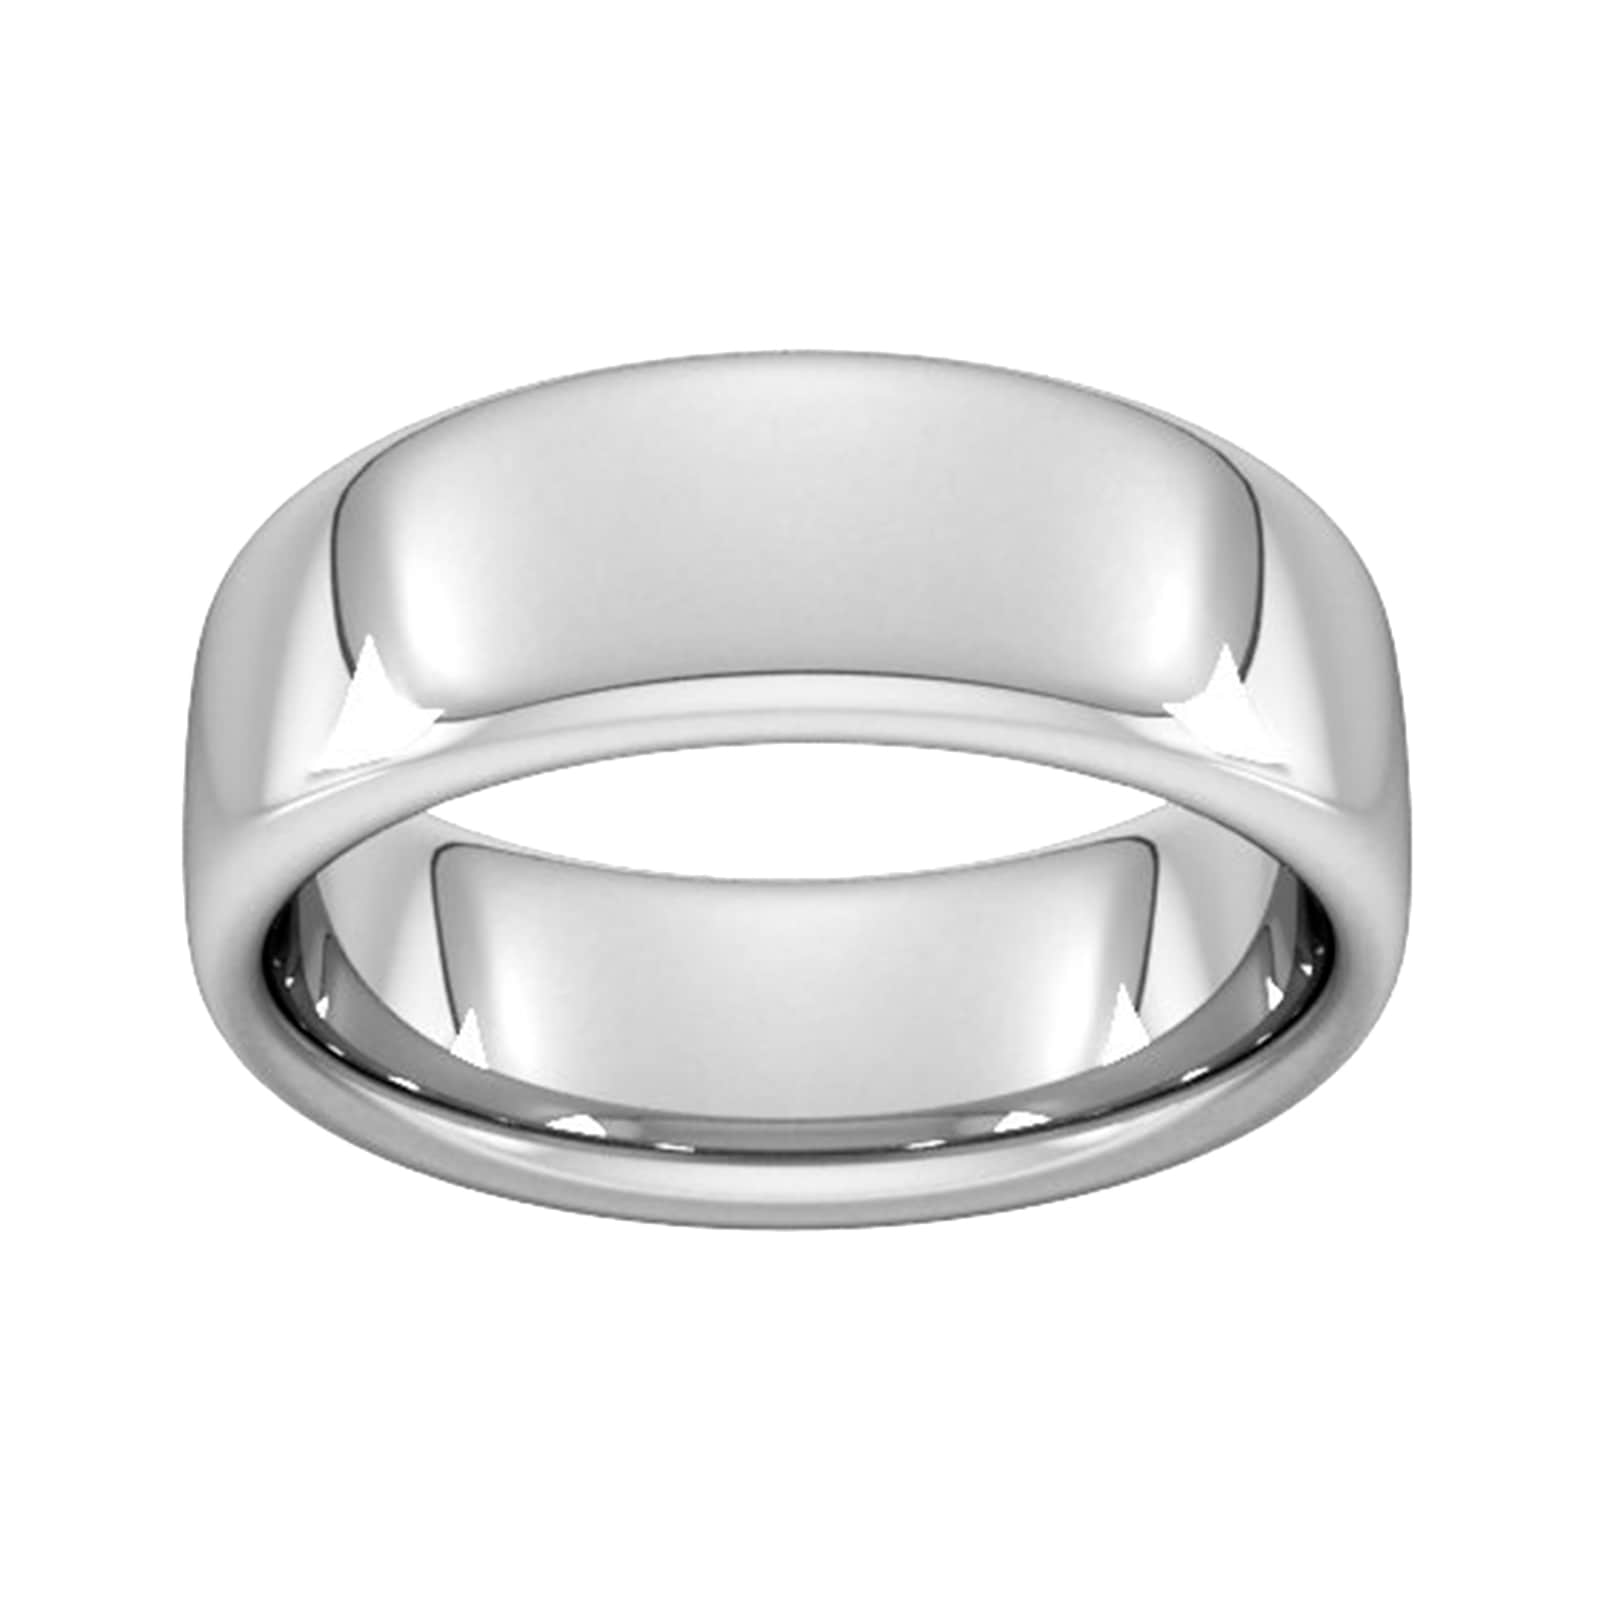 8mm Slight Court Extra Heavy Wedding Ring In Sterling Silver - Ring Size M